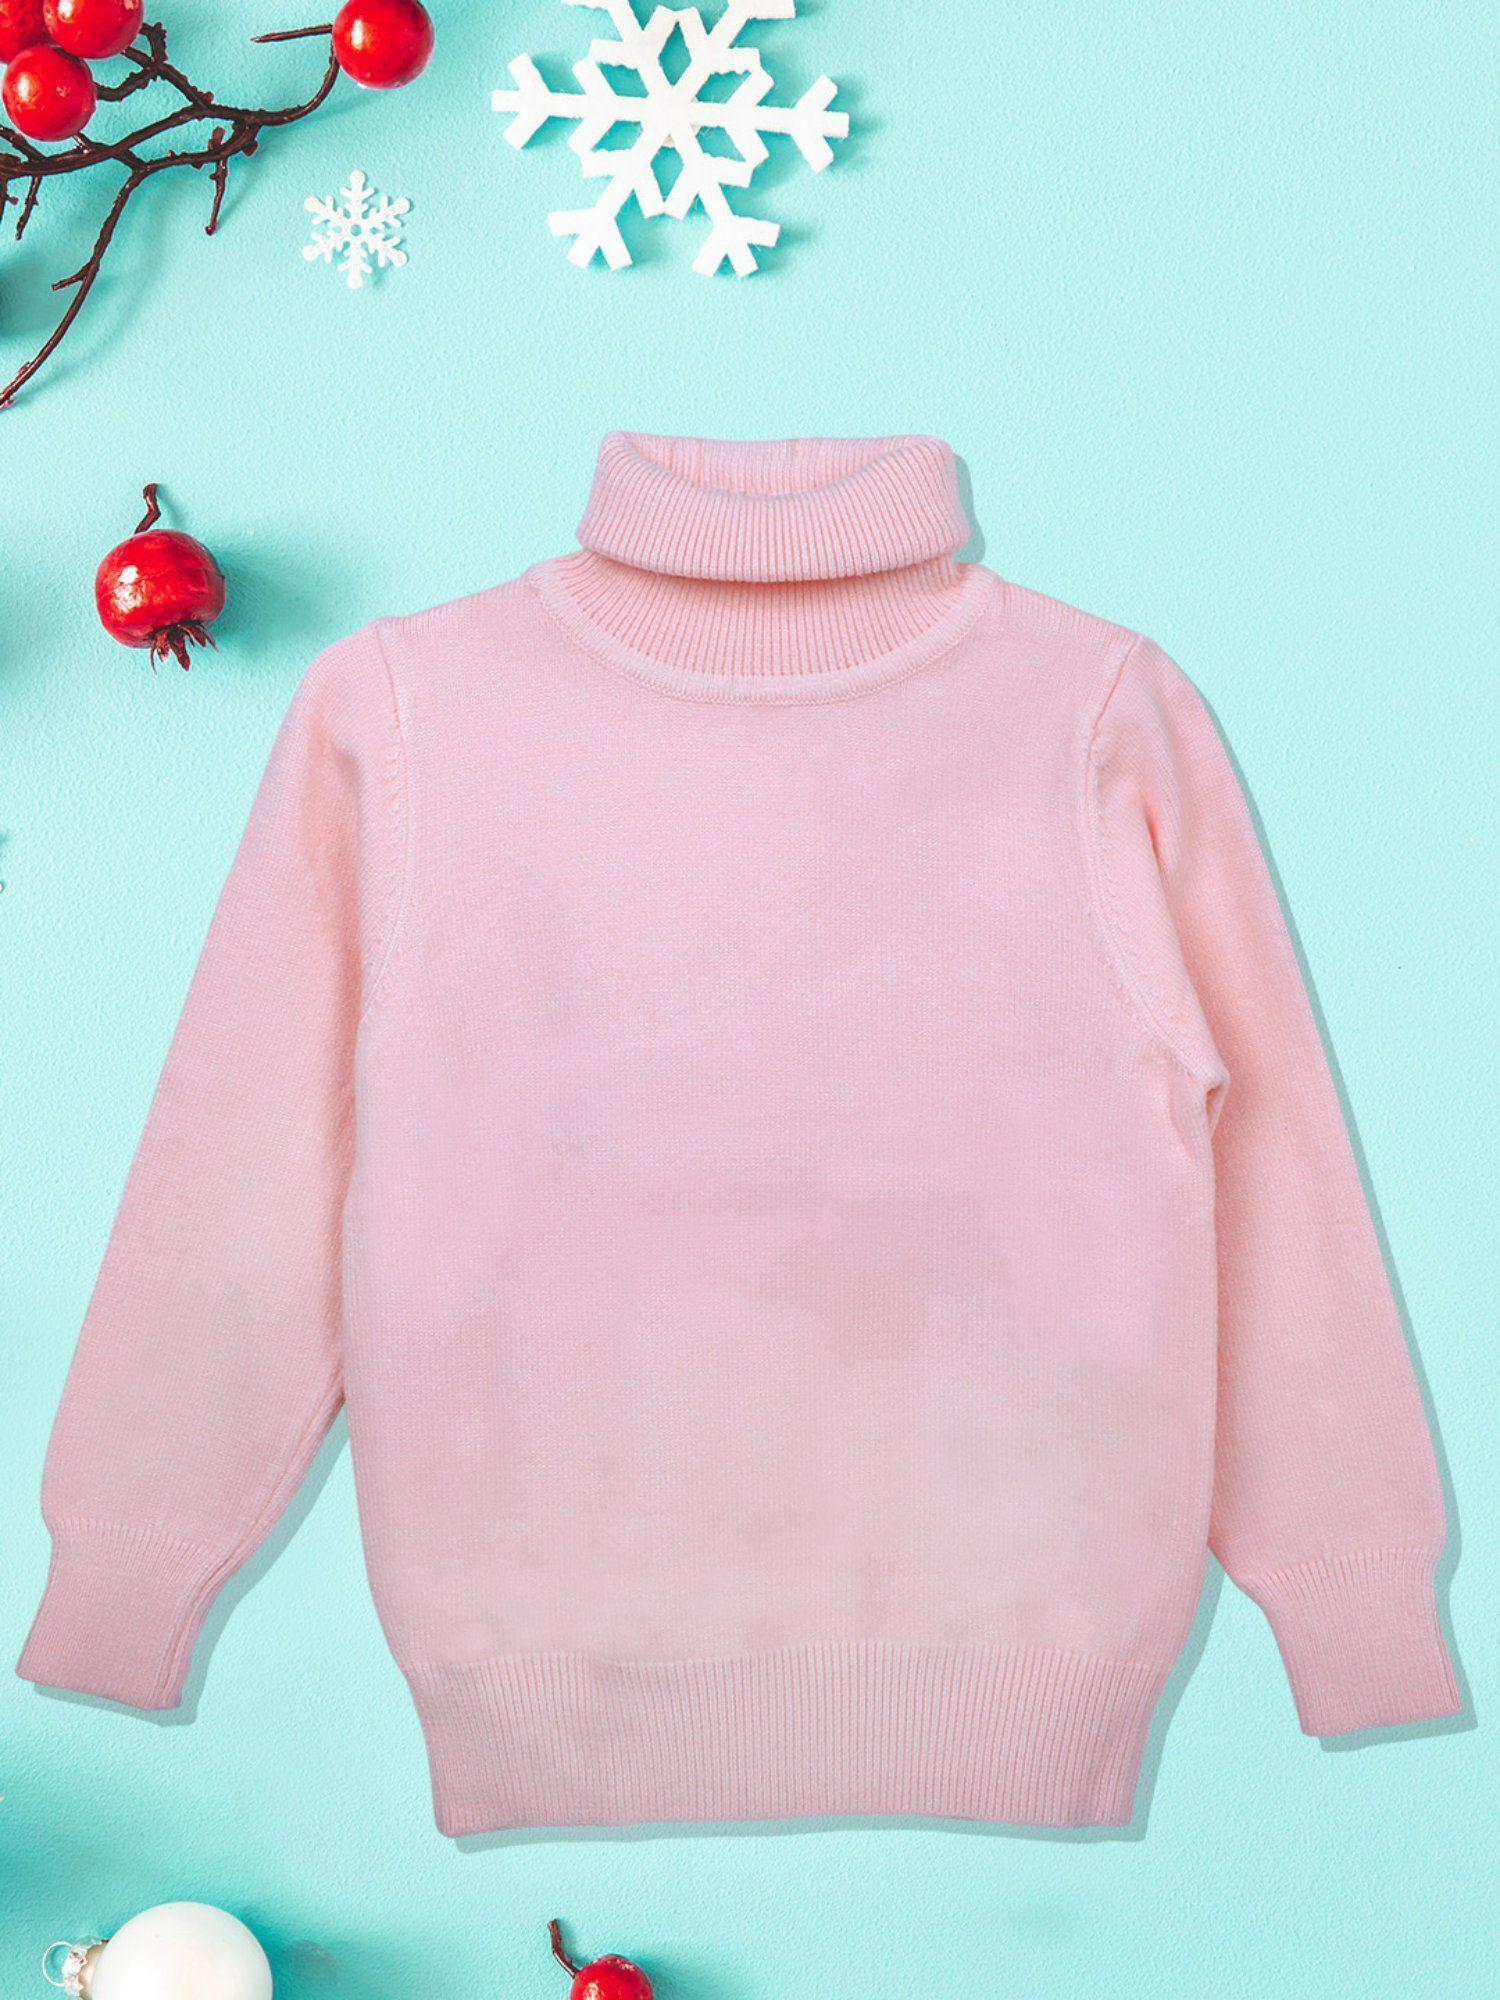 Basic Ribbed Premium Full Sleeves Knitted Kids Sweater Pink